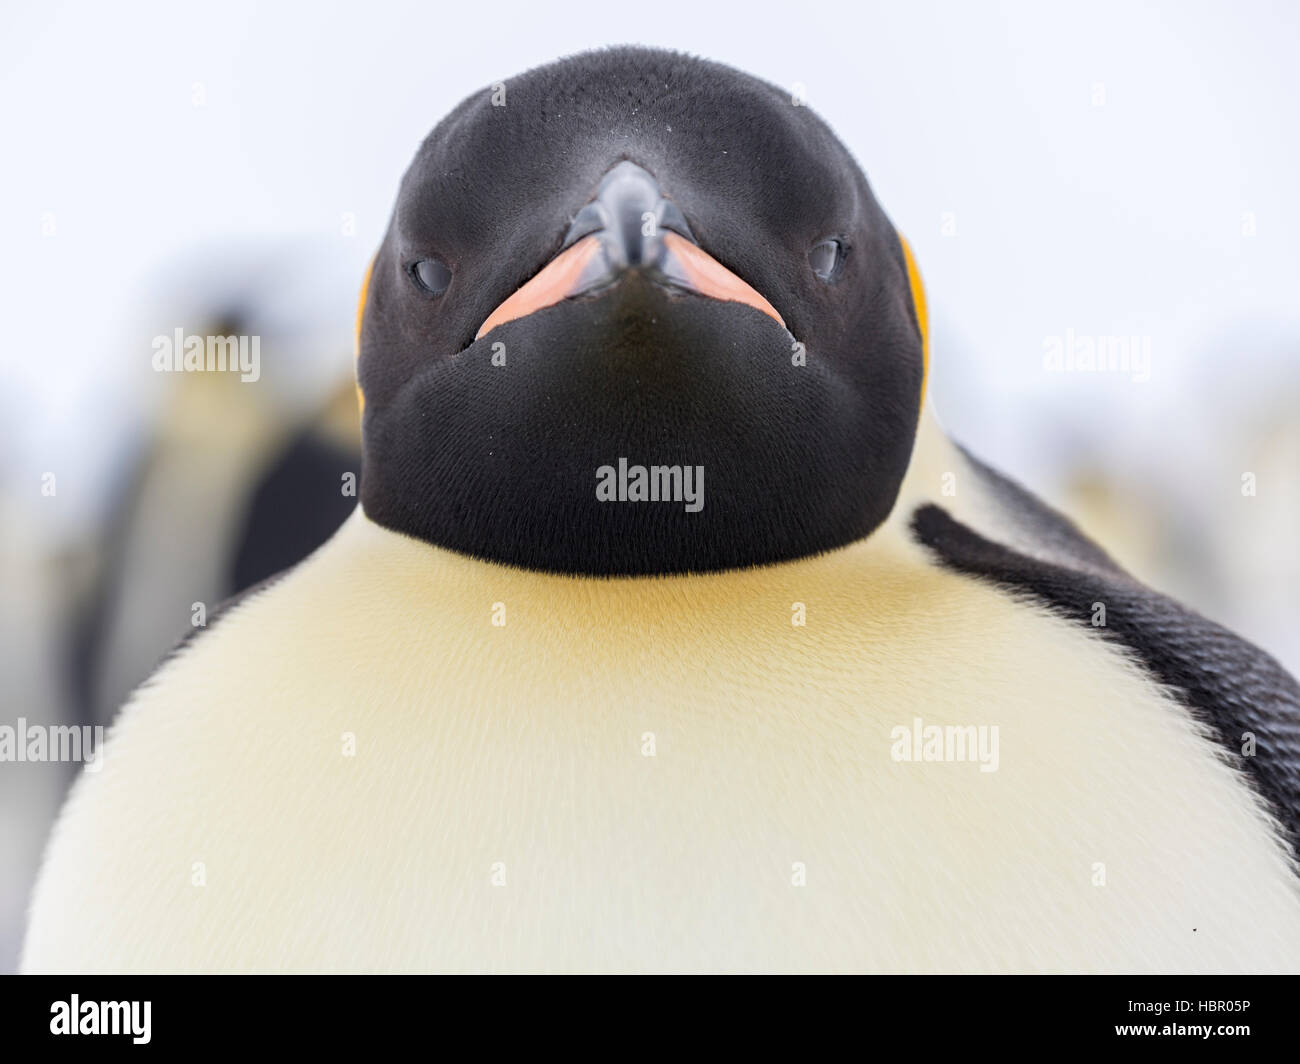 Stern portrait of on an Emperor Penguin Stock Photo